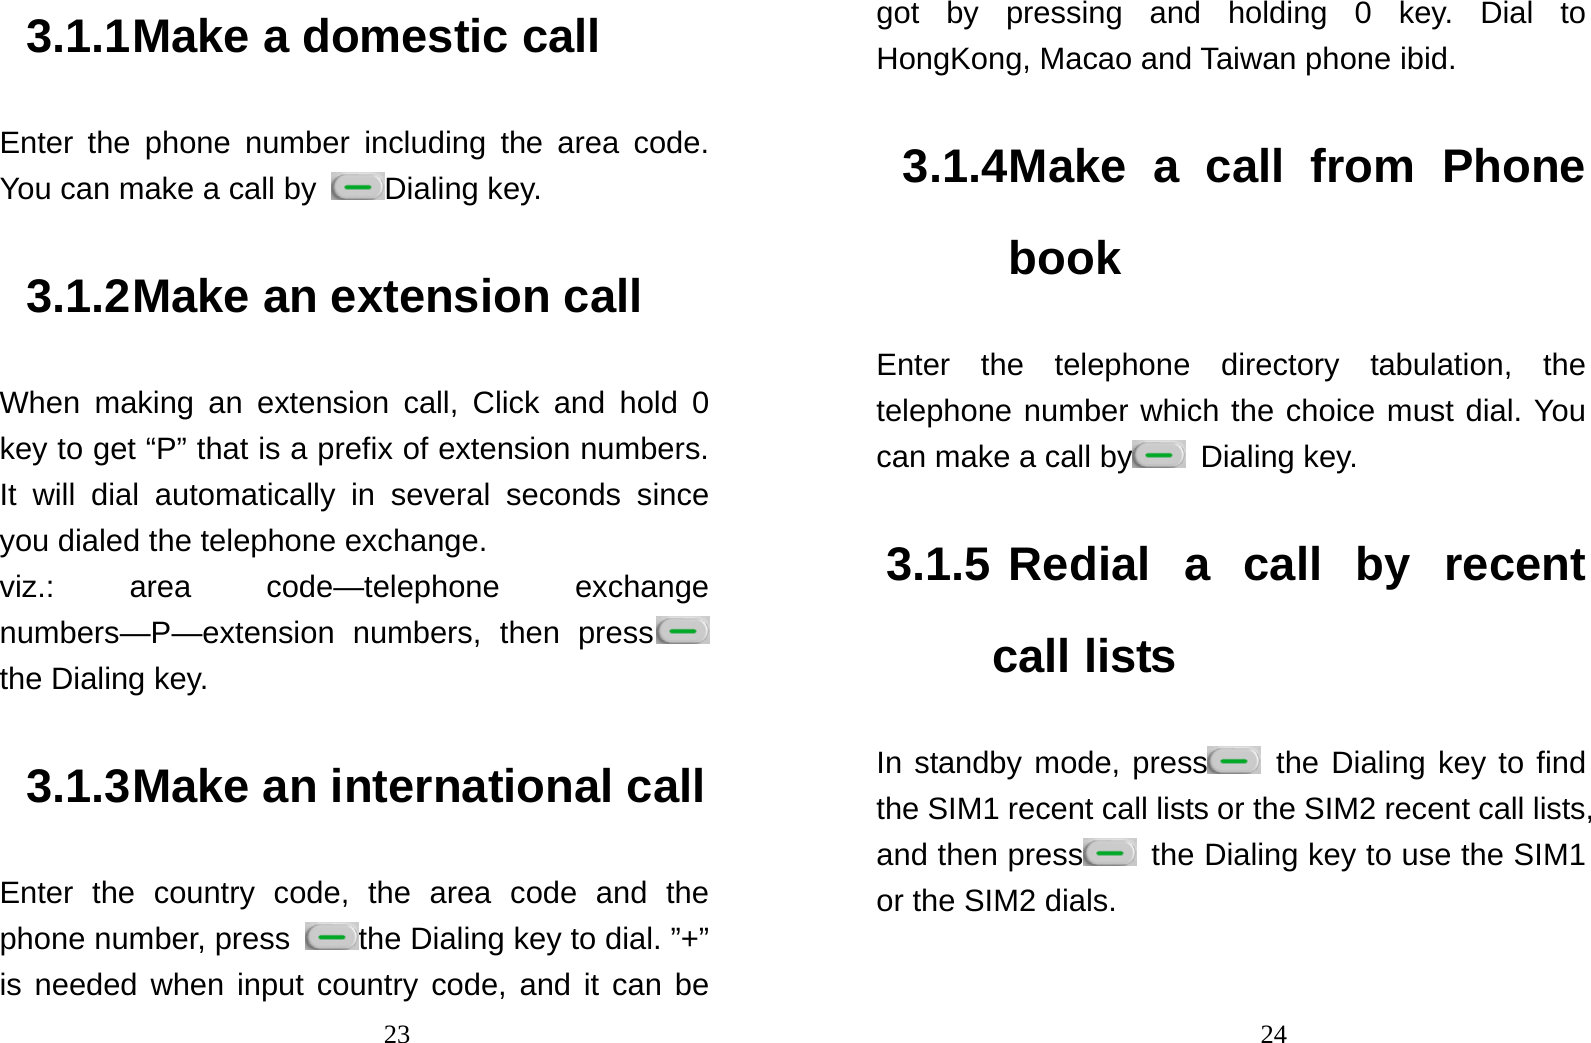                                233.1.1 Make a domestic call Enter the phone number including the area code. You can make a call by  Dialing key.   3.1.2 Make an extension call When making an extension call, Click and hold 0 key to get “P” that is a prefix of extension numbers. It will dial automatically in several seconds since you dialed the telephone exchange.   viz.: area code—telephone exchange numbers—P—extension numbers, then press  the Dialing key.   3.1.3 Make an international call Enter the country code, the area code and the phone number, press  the Dialing key to dial. ”+” is needed when input country code, and it can be                                24got by pressing and holding 0 key. Dial to HongKong, Macao and Taiwan phone ibid. 3.1.4 Make a call from Phone book Enter the telephone directory tabulation, the telephone number which the choice must dial. You can make a call by  Dialing key.  3.1.5 Redial a call by recent call lists In standby mode, press  the Dialing key to find the SIM1 recent call lists or the SIM2 recent call lists, and then press   the Dialing key to use the SIM1 or the SIM2 dials.  